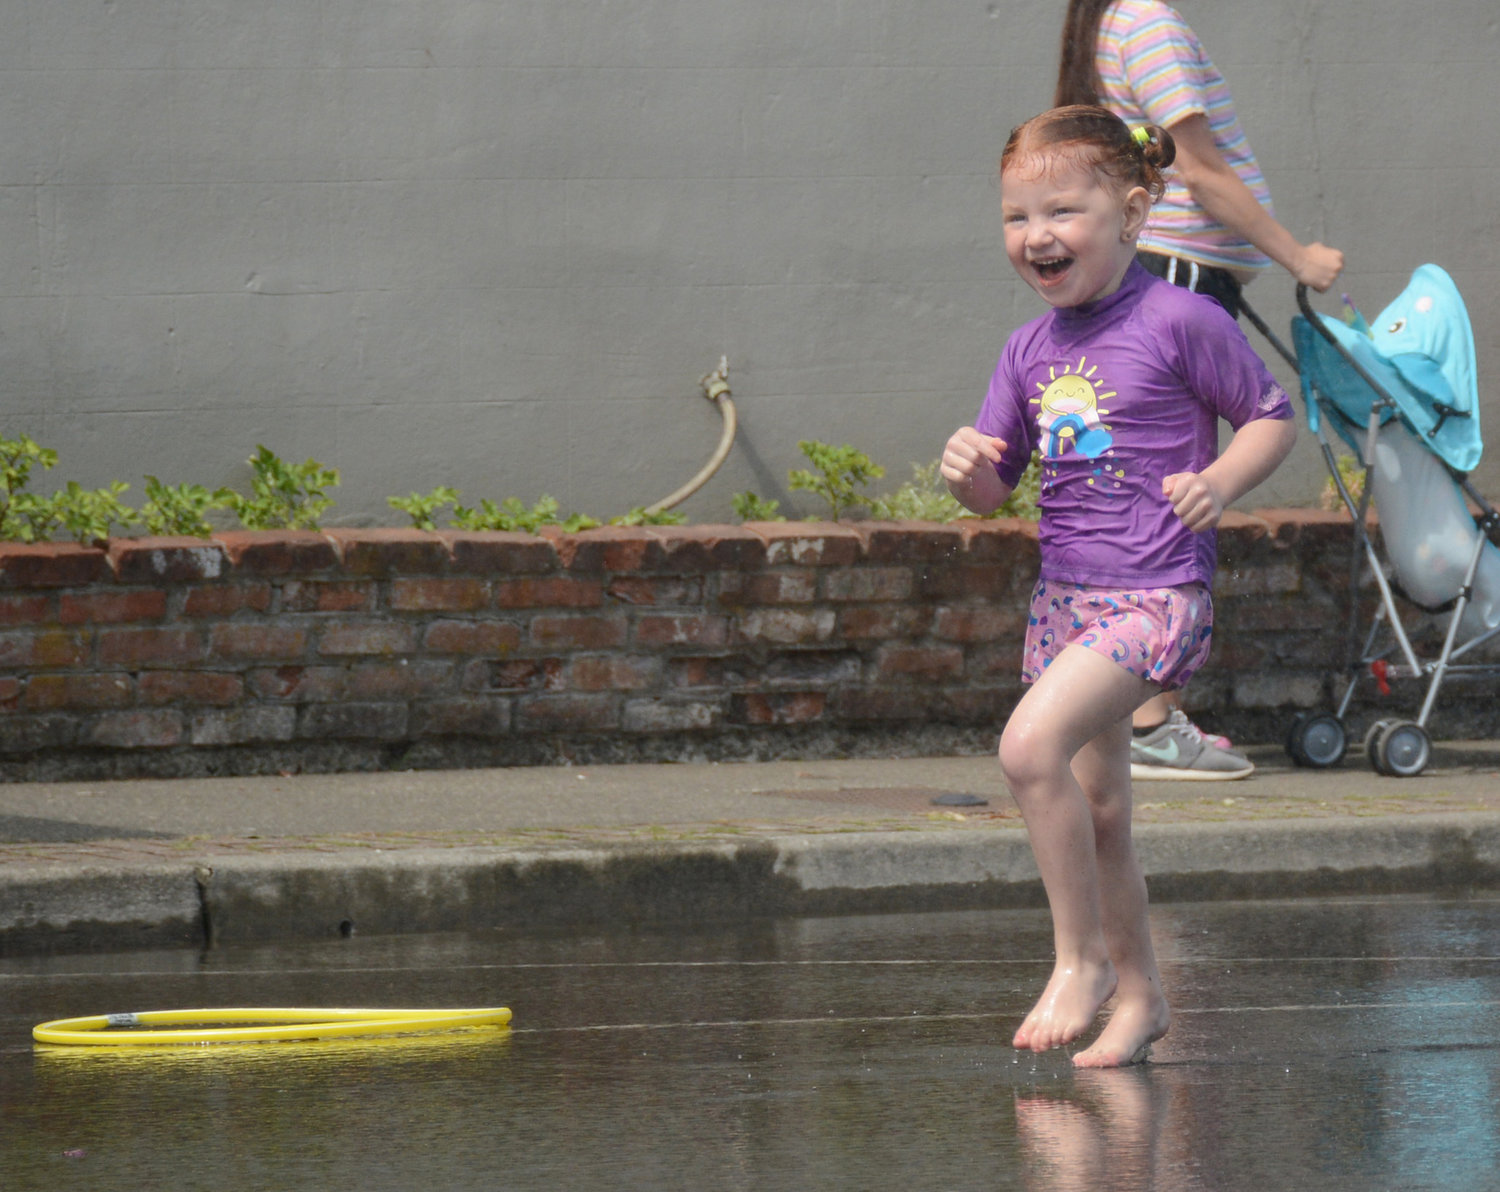 Children run through sprinklers and fire hydrants on 3rd Street in downtown Blaine during Splash Days, put on by Blaine-Birch Bay Park and Recreation District 2 and the city of Blaine August 12.